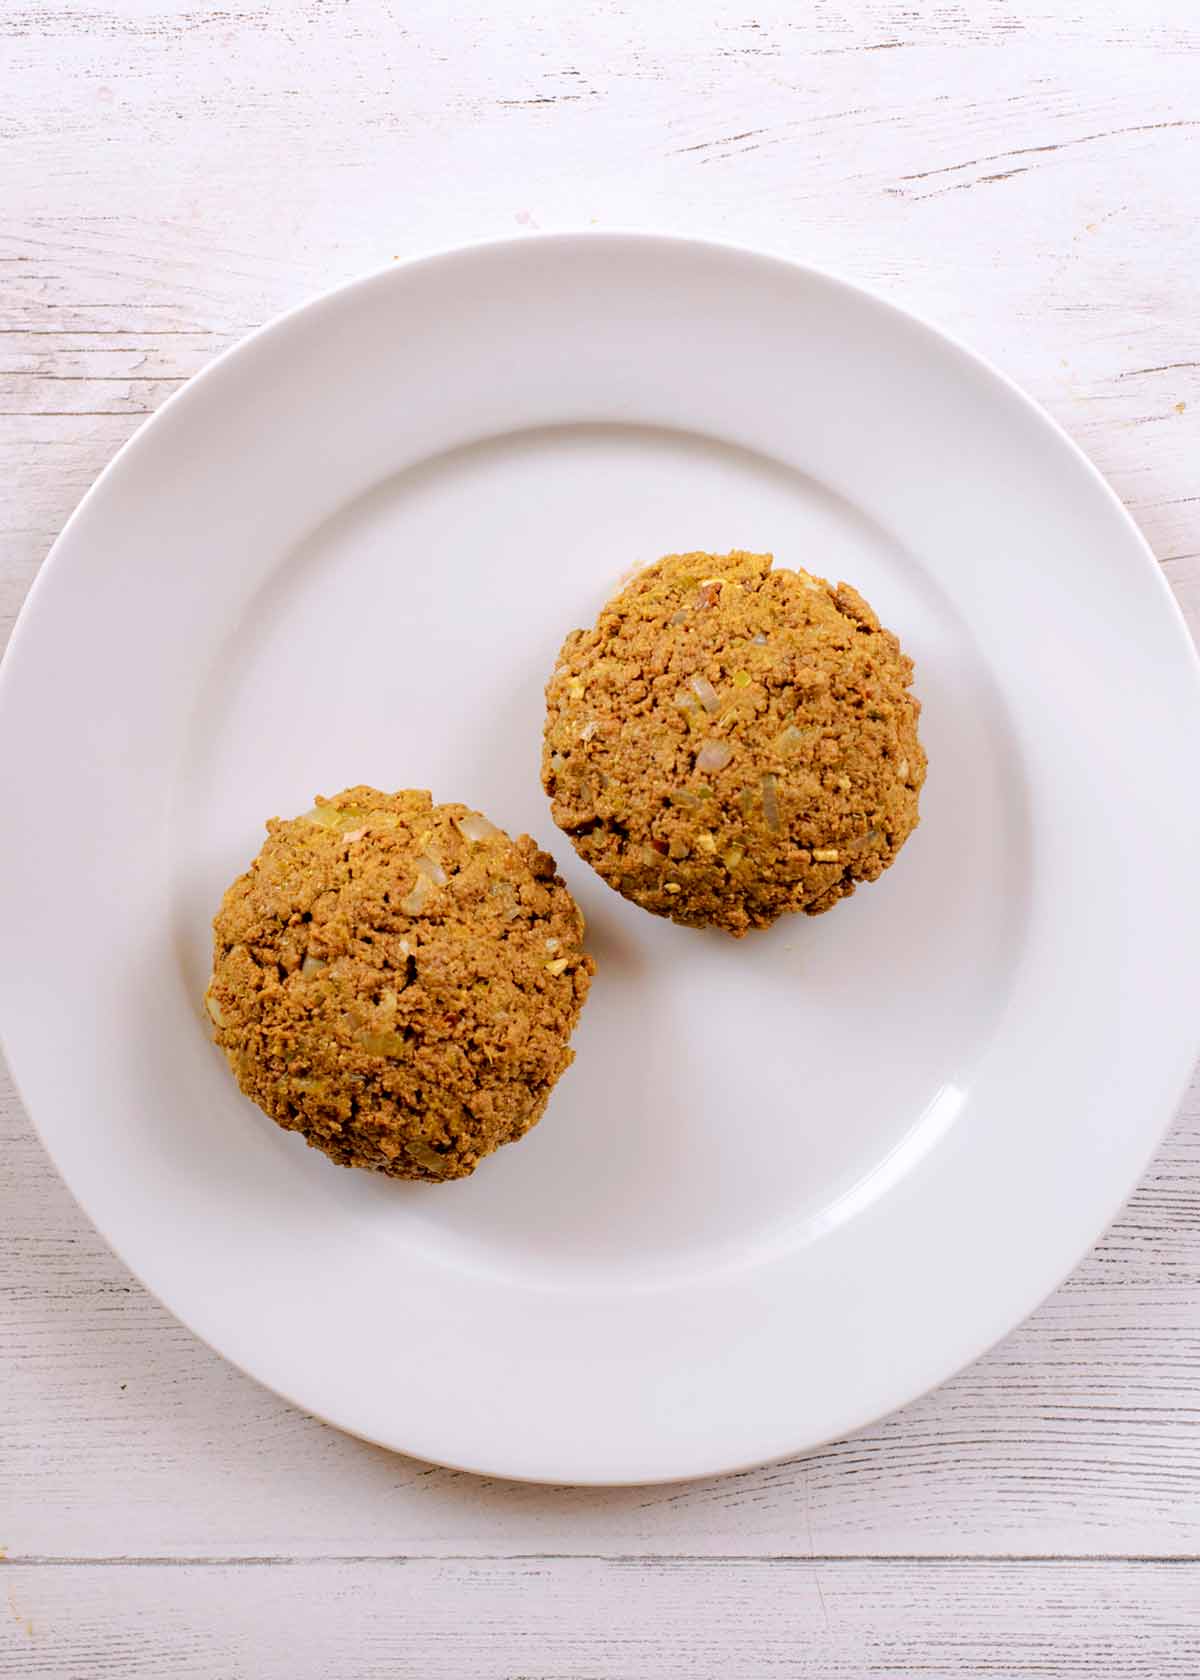 Two meat free quorn burgers on a white plate.